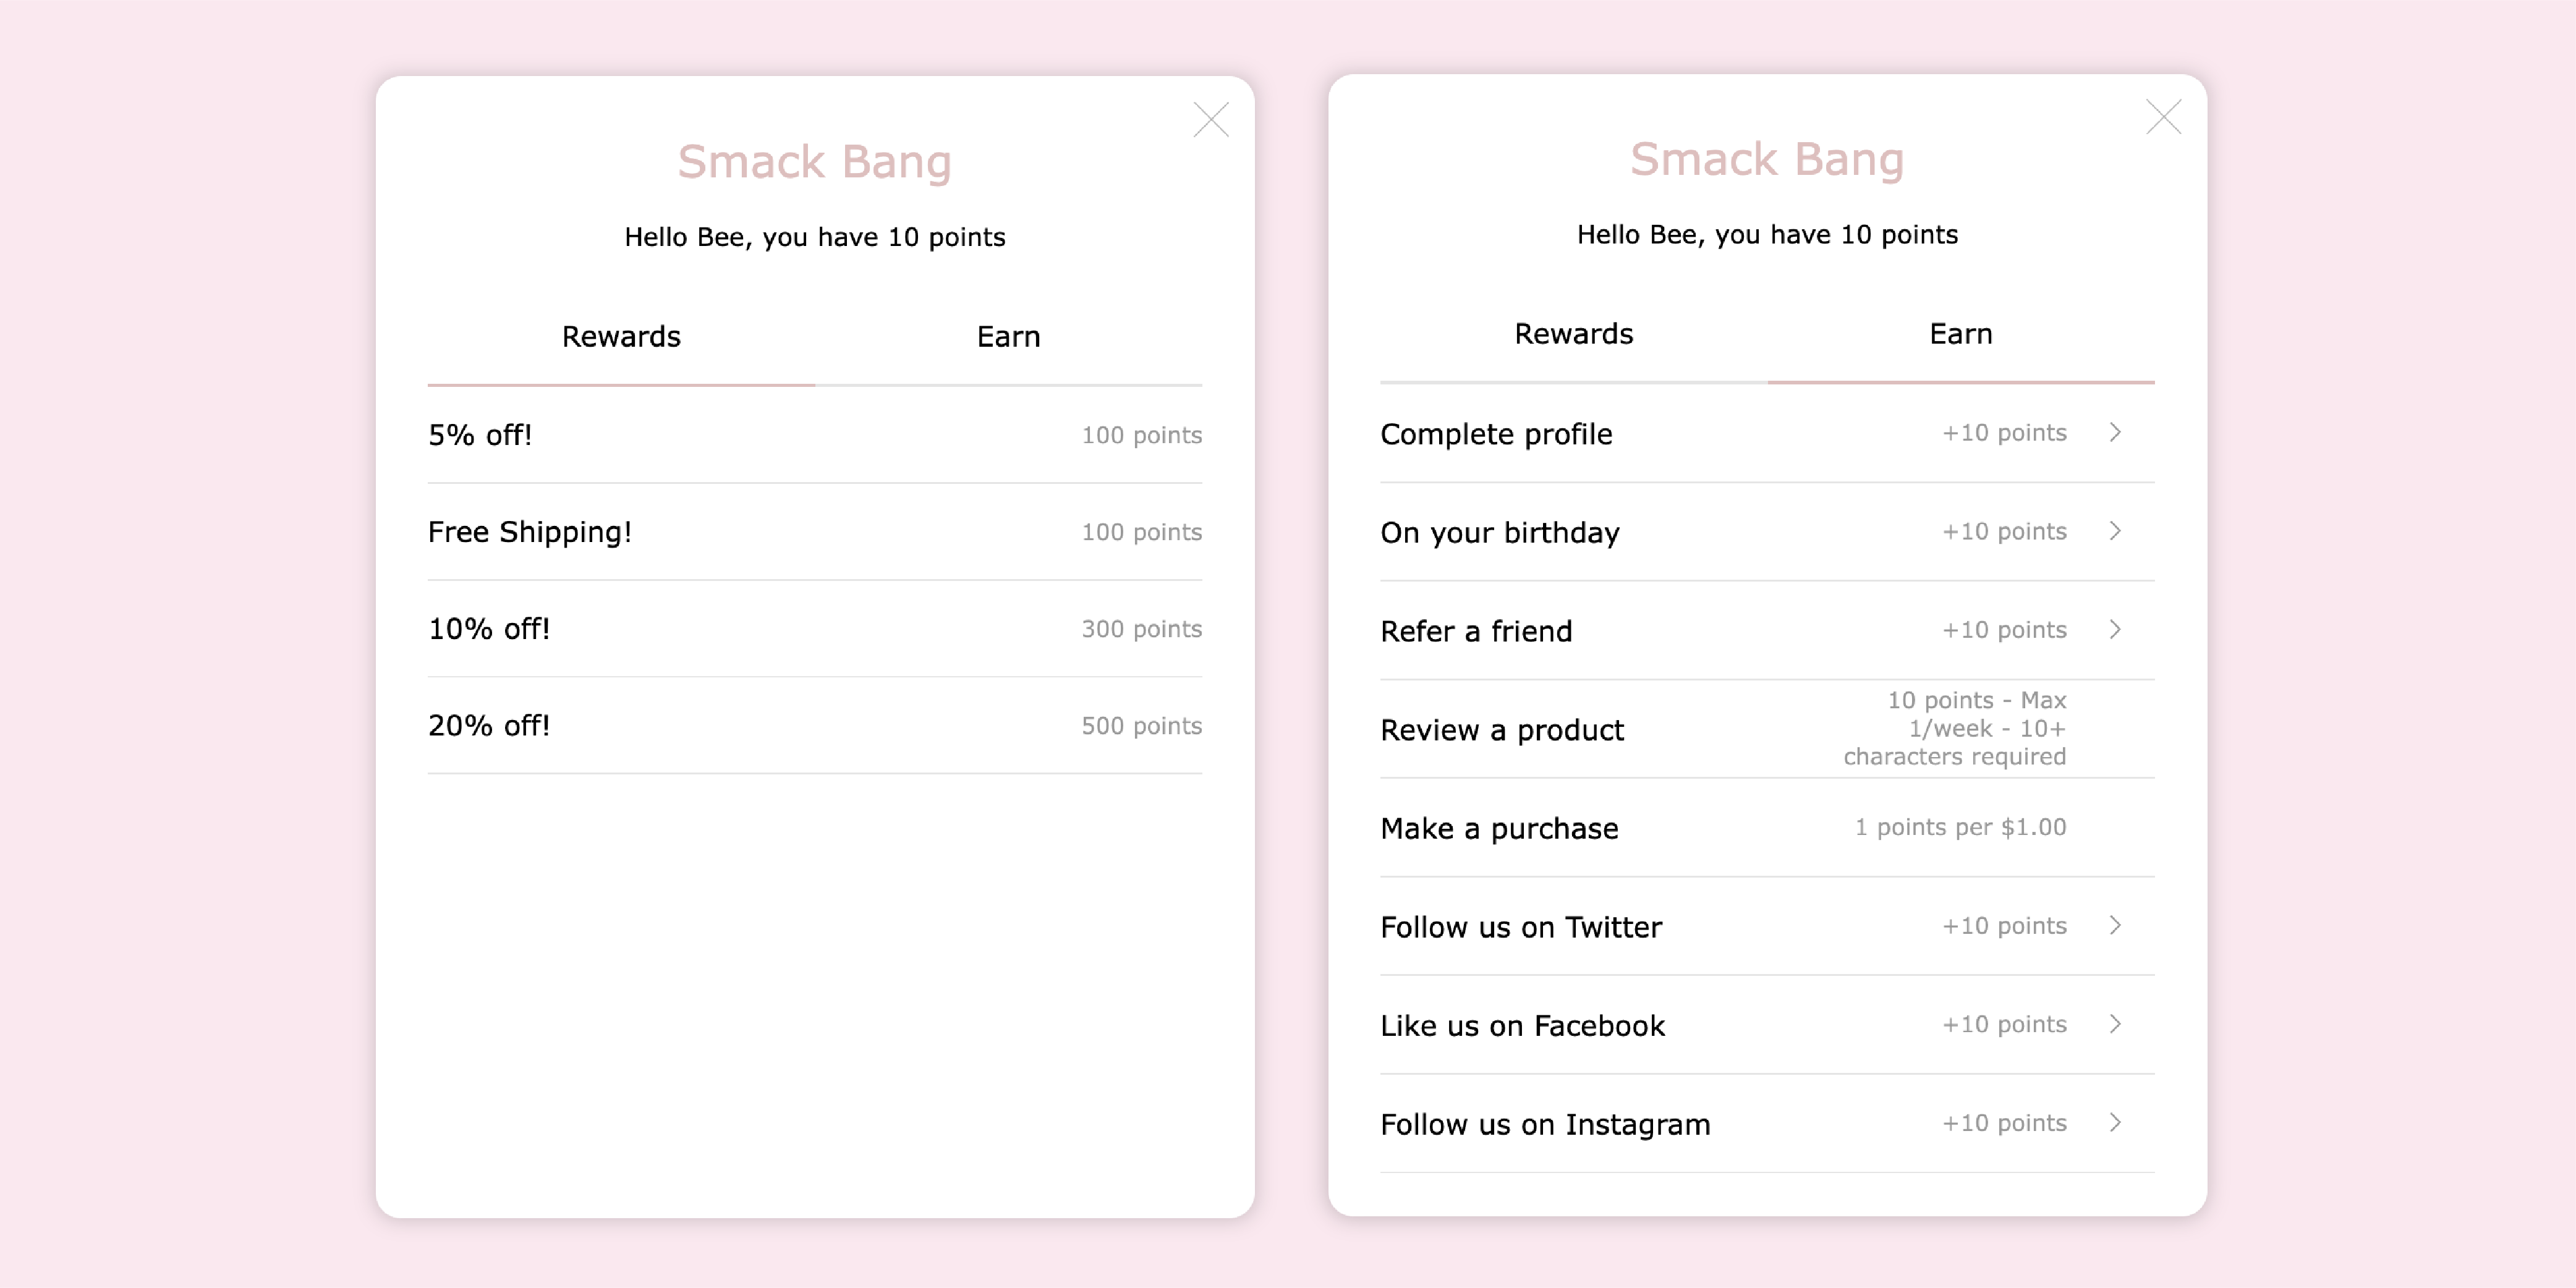 Smack bang's earn and rewards options from their eCommerce store's loyalty widget